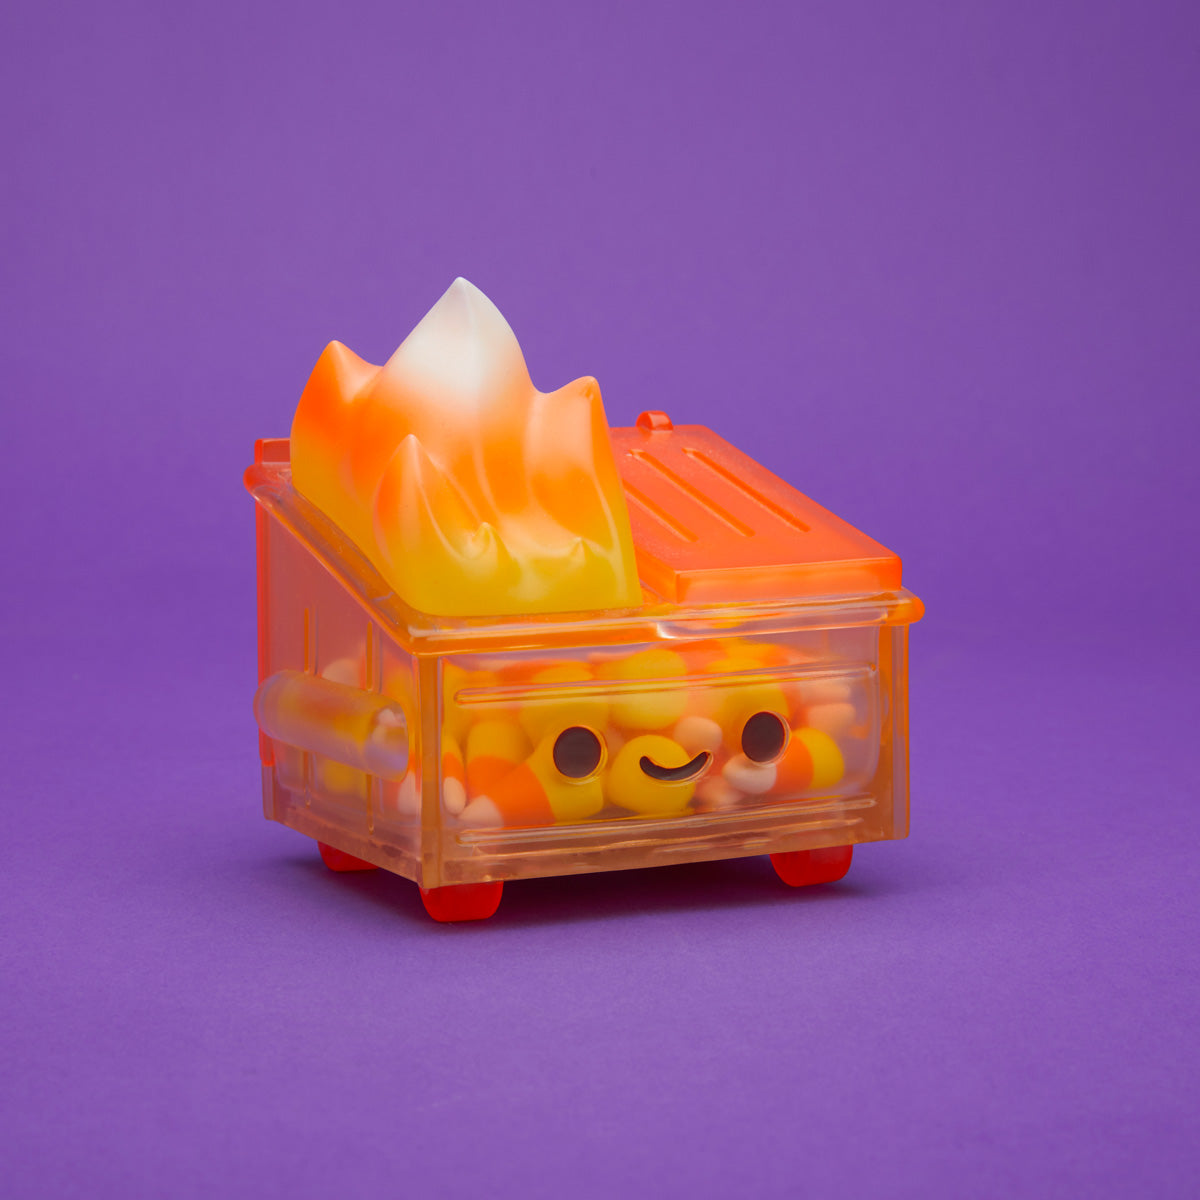 Orange translucent Dumpster Fire filled with candy corn and a yellow, orange, and white flame from the side.